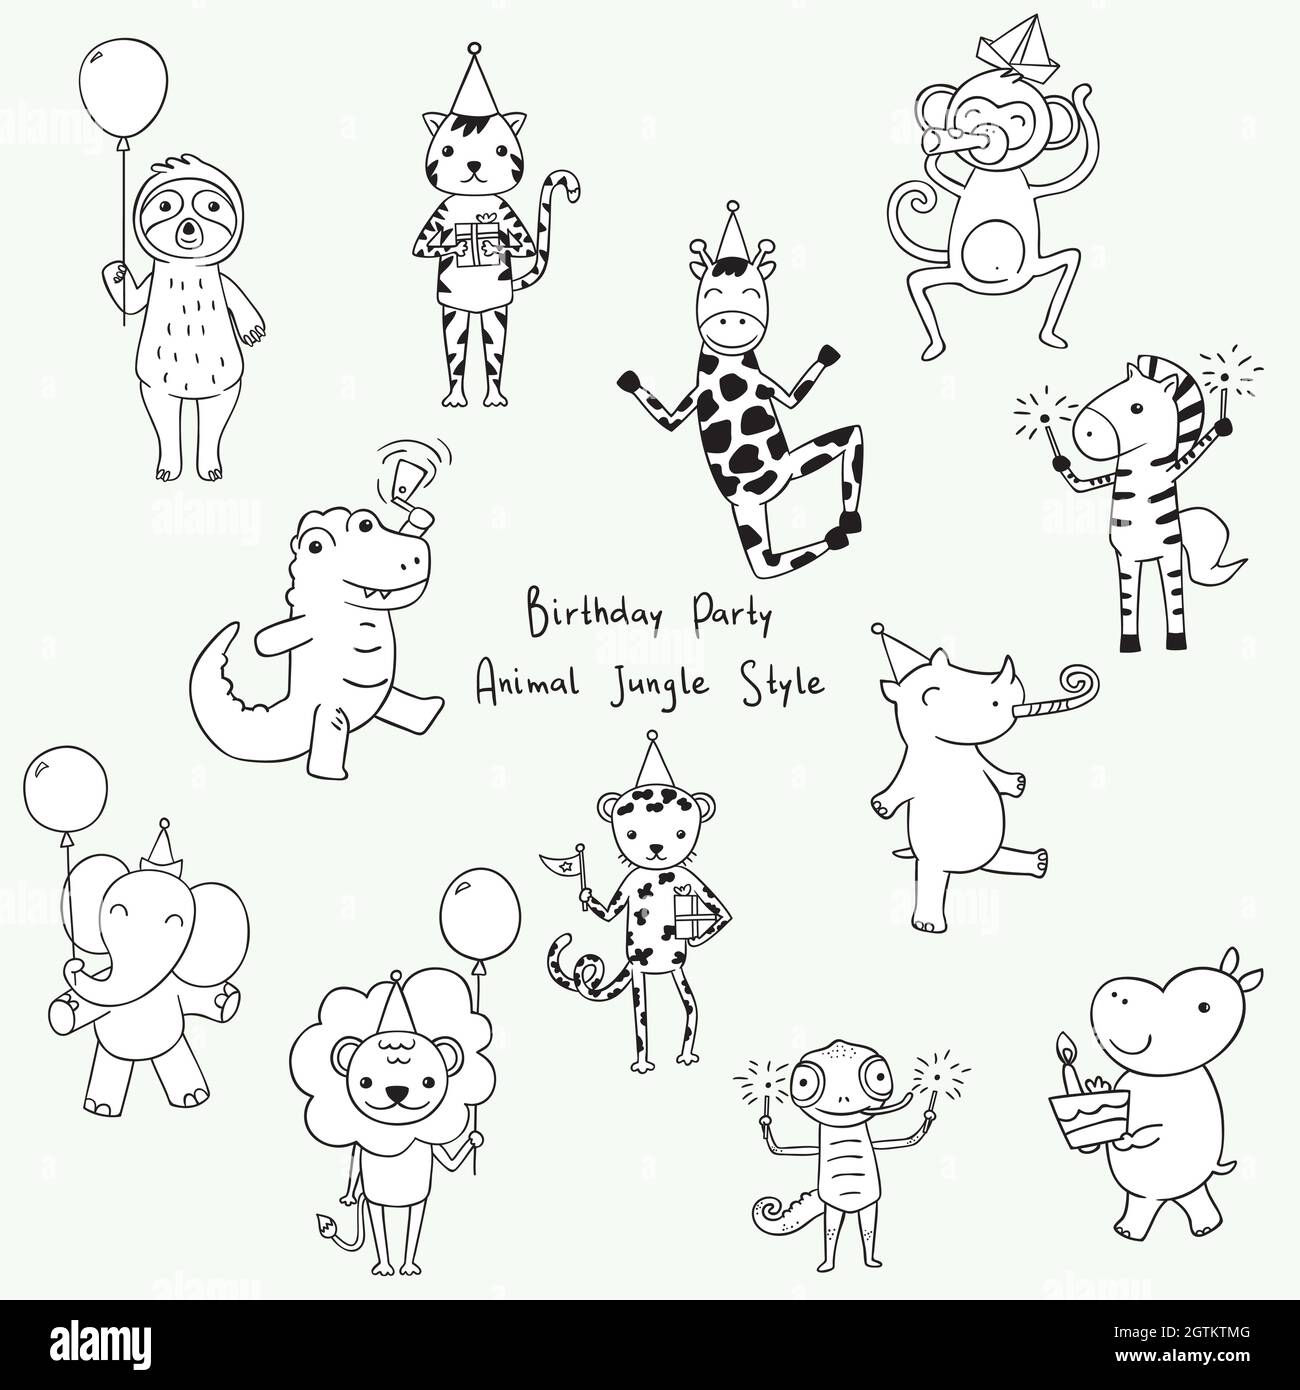 Cute jungle and safari animals. Hand drawn Birthday Characters. Cartoon zoo characters. Balloon, cake and gifts. Black and white. Stock Vector